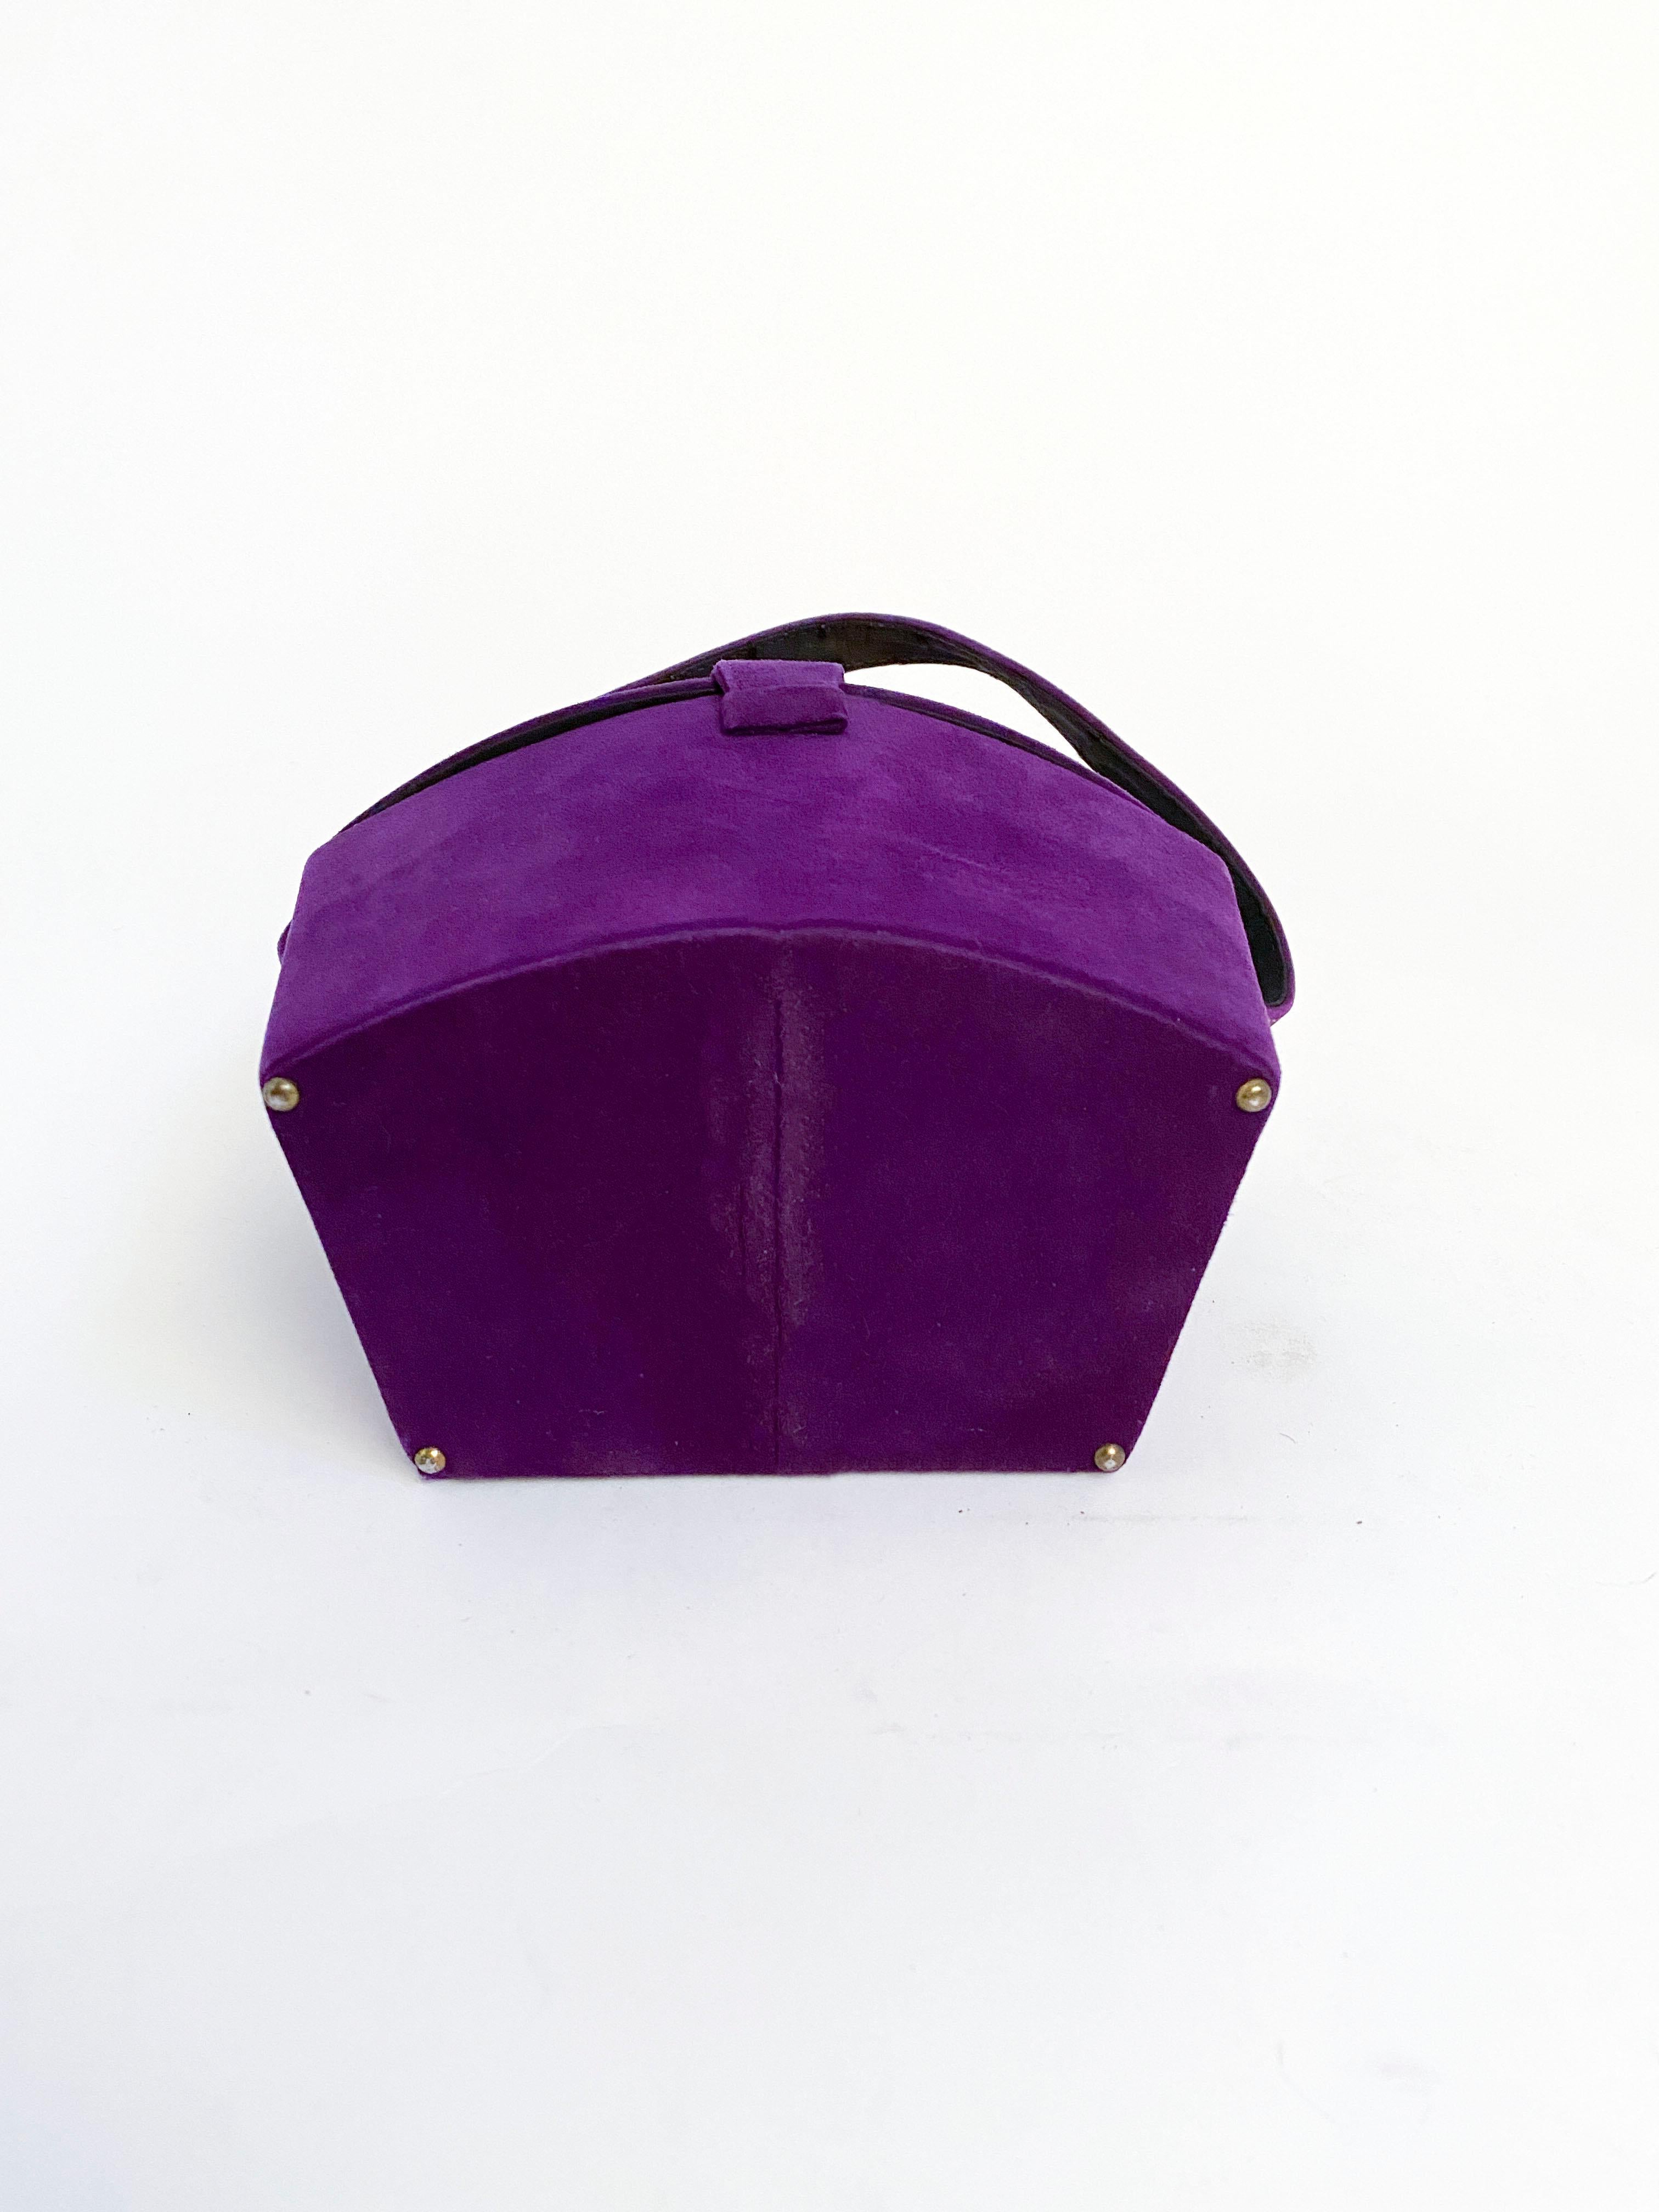 1950s French Perma-suede Purple Hand Bag 1